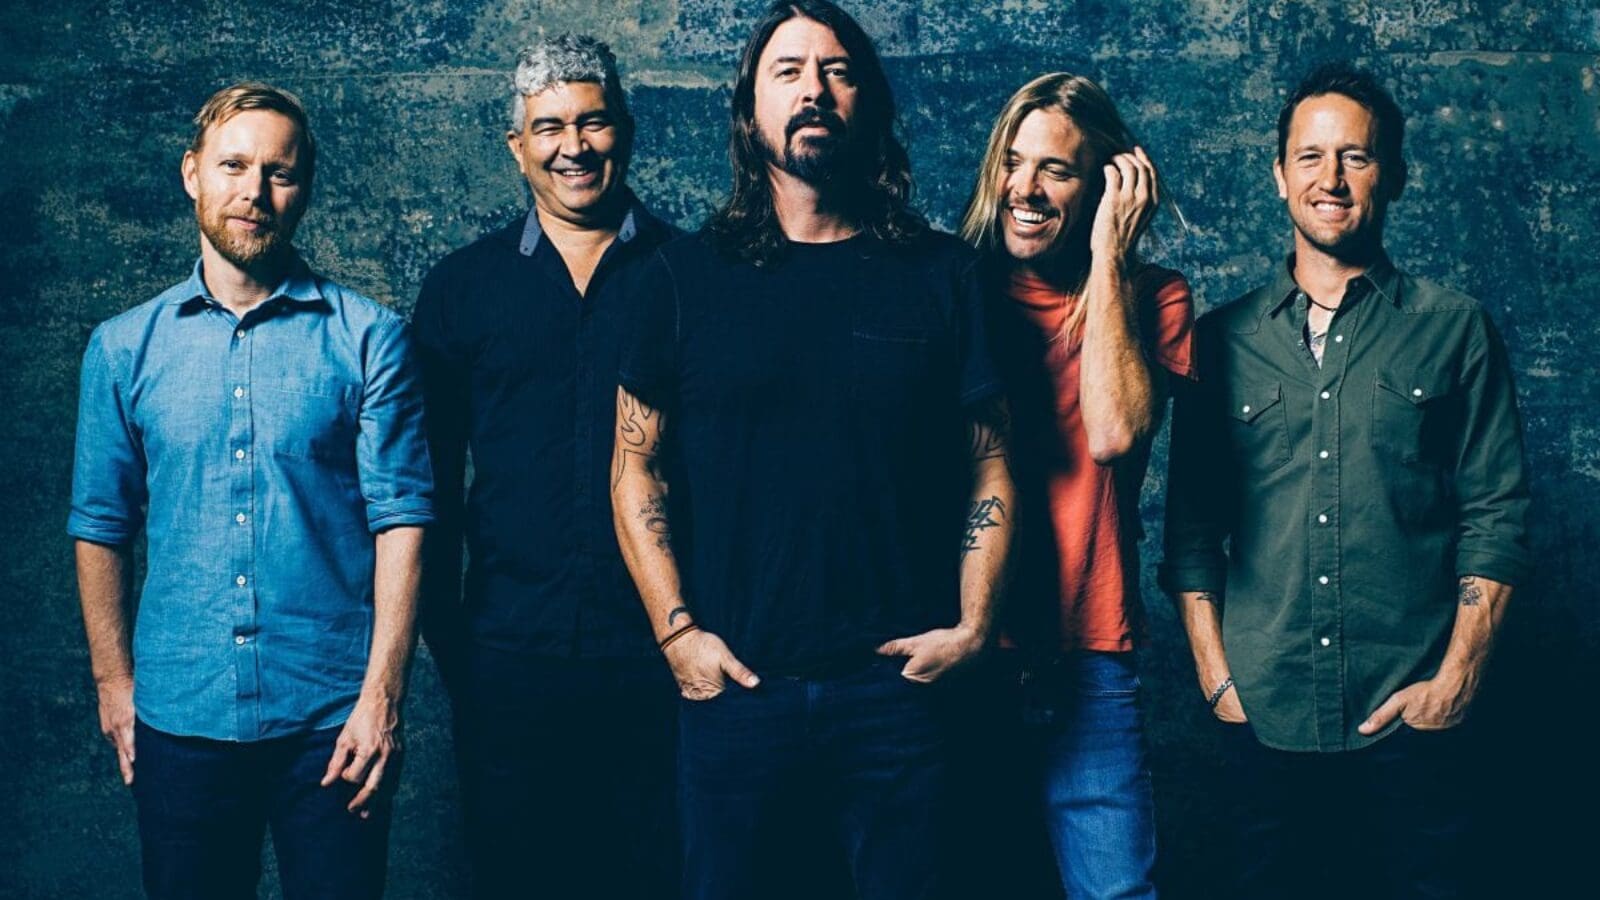 “PLAY” Musiccamp by Dave Grohl am 17. & 18.11. in Berlin